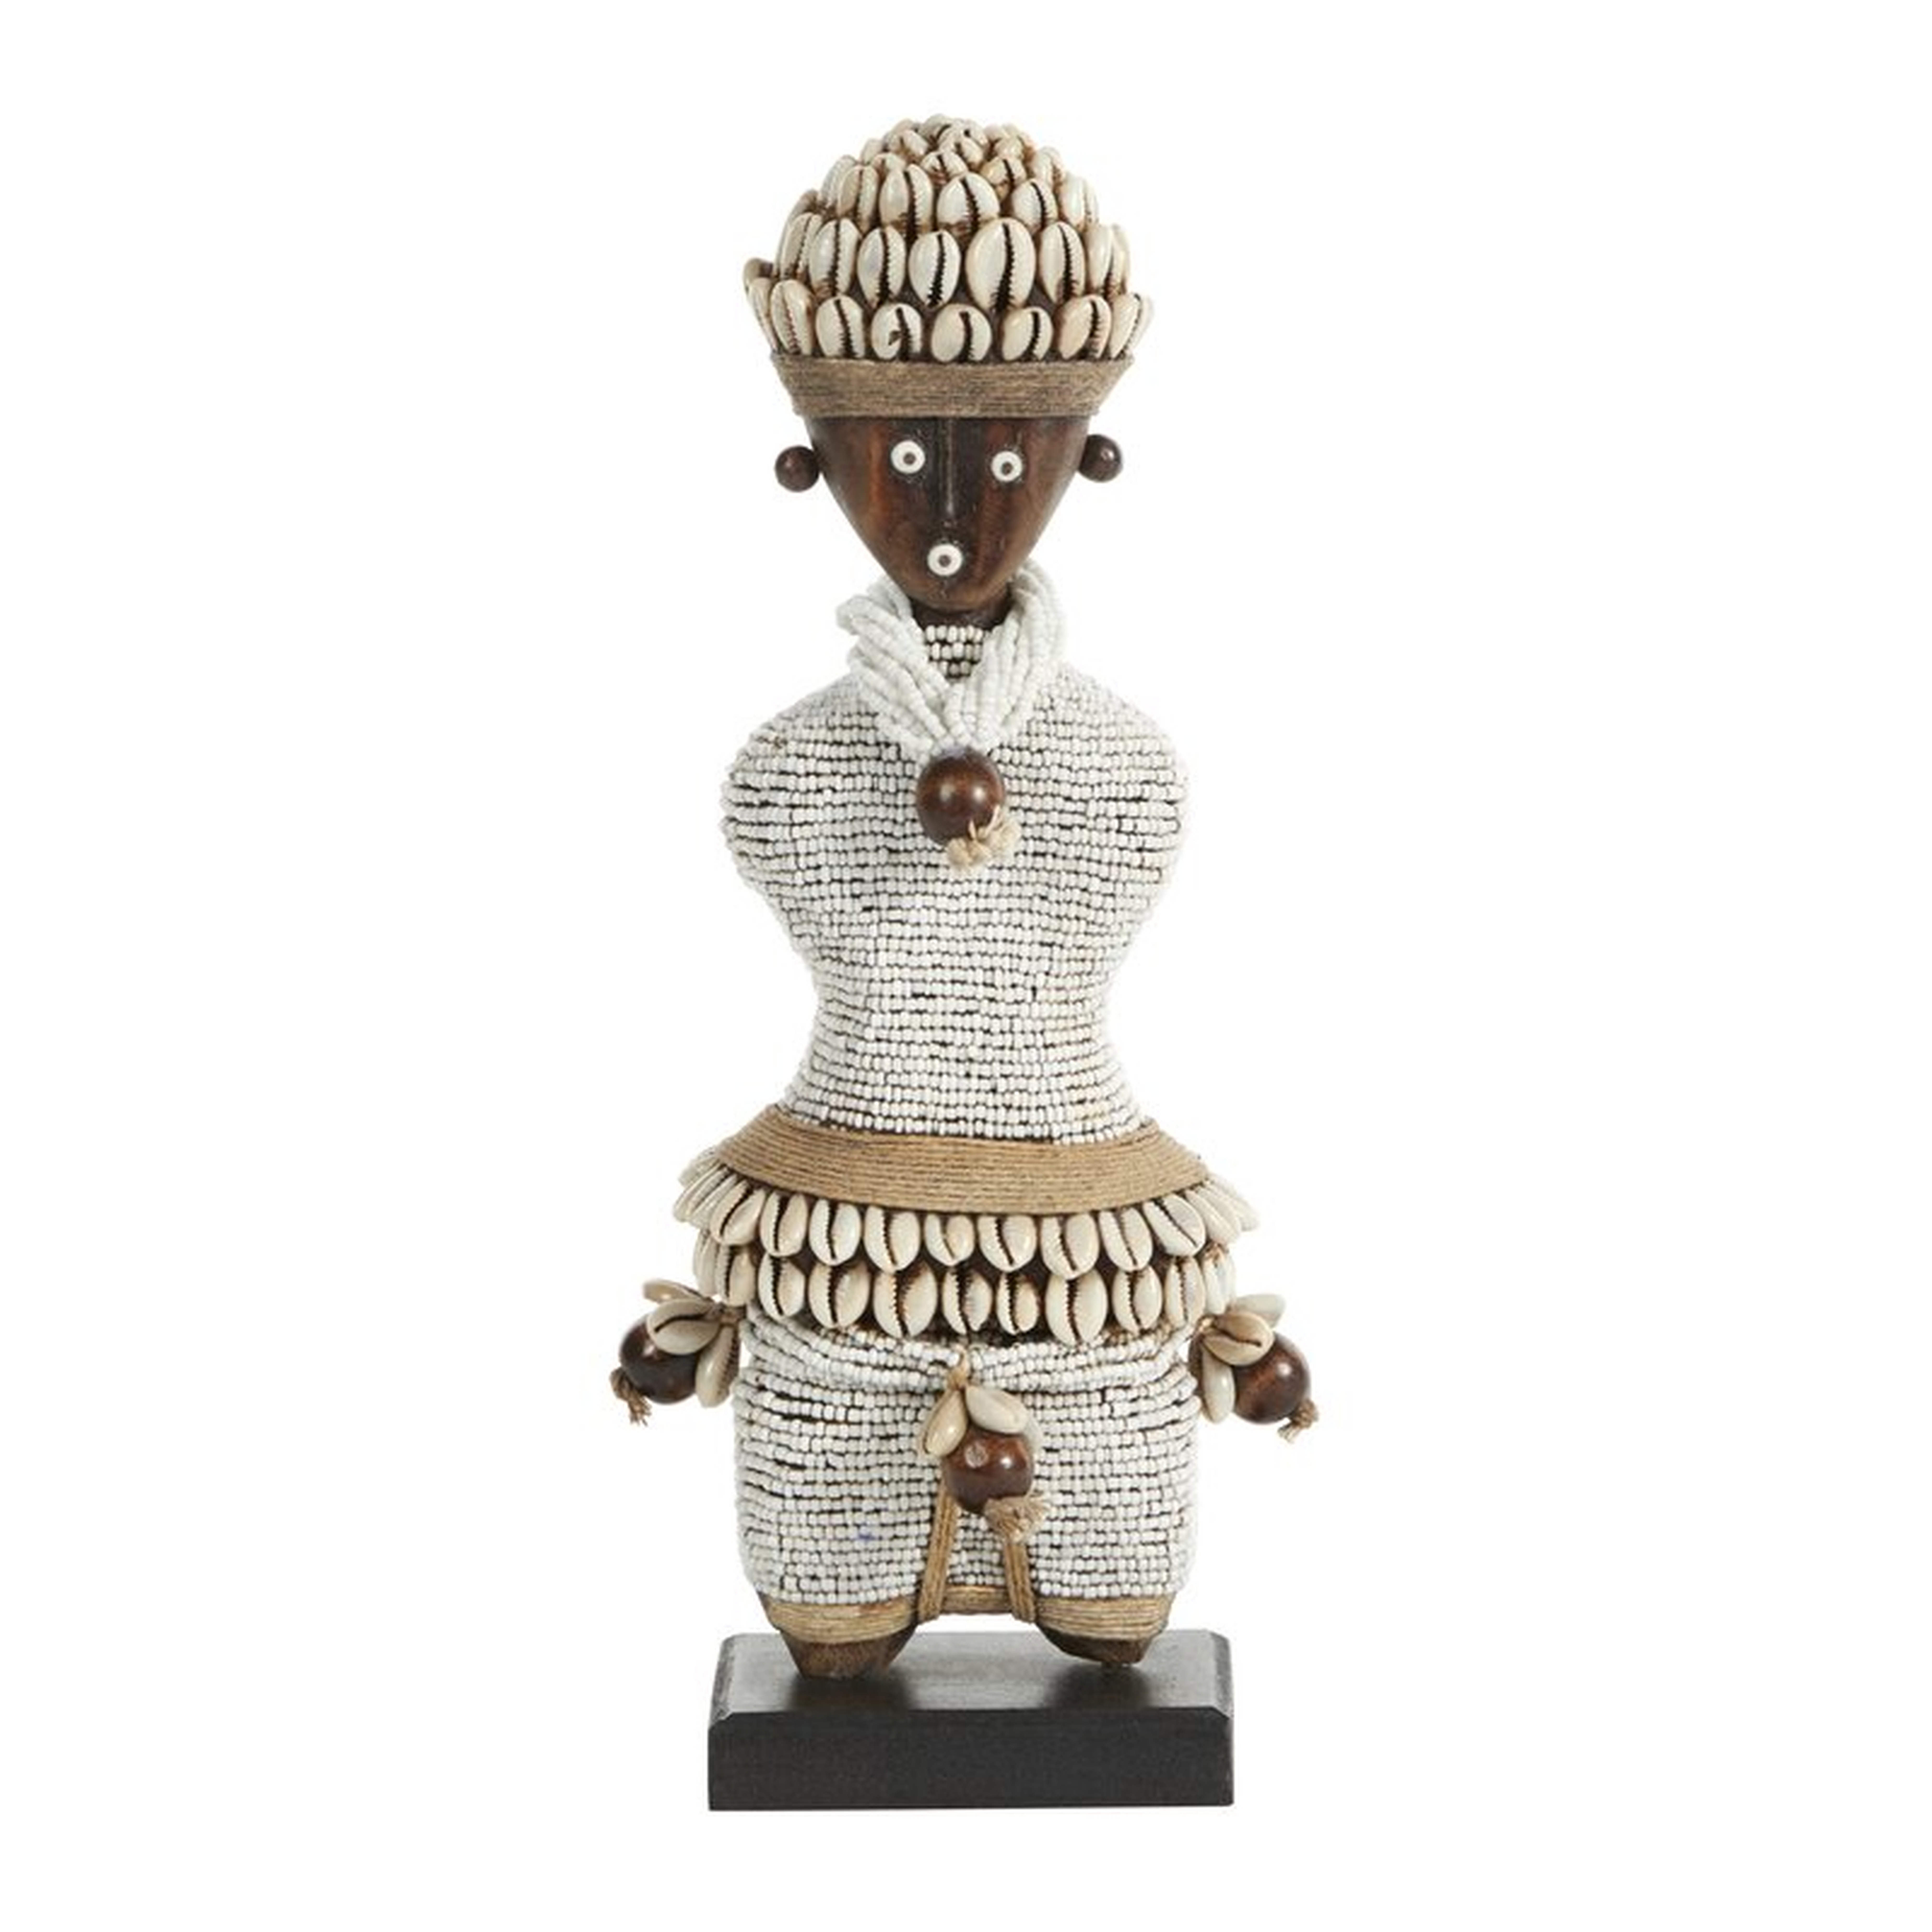 African Treasures Small Hand-Crafted Pine Wood, Cowrie Shells, White Beads & Kente Cloth African Woman Namji Doll Figurine - Perigold